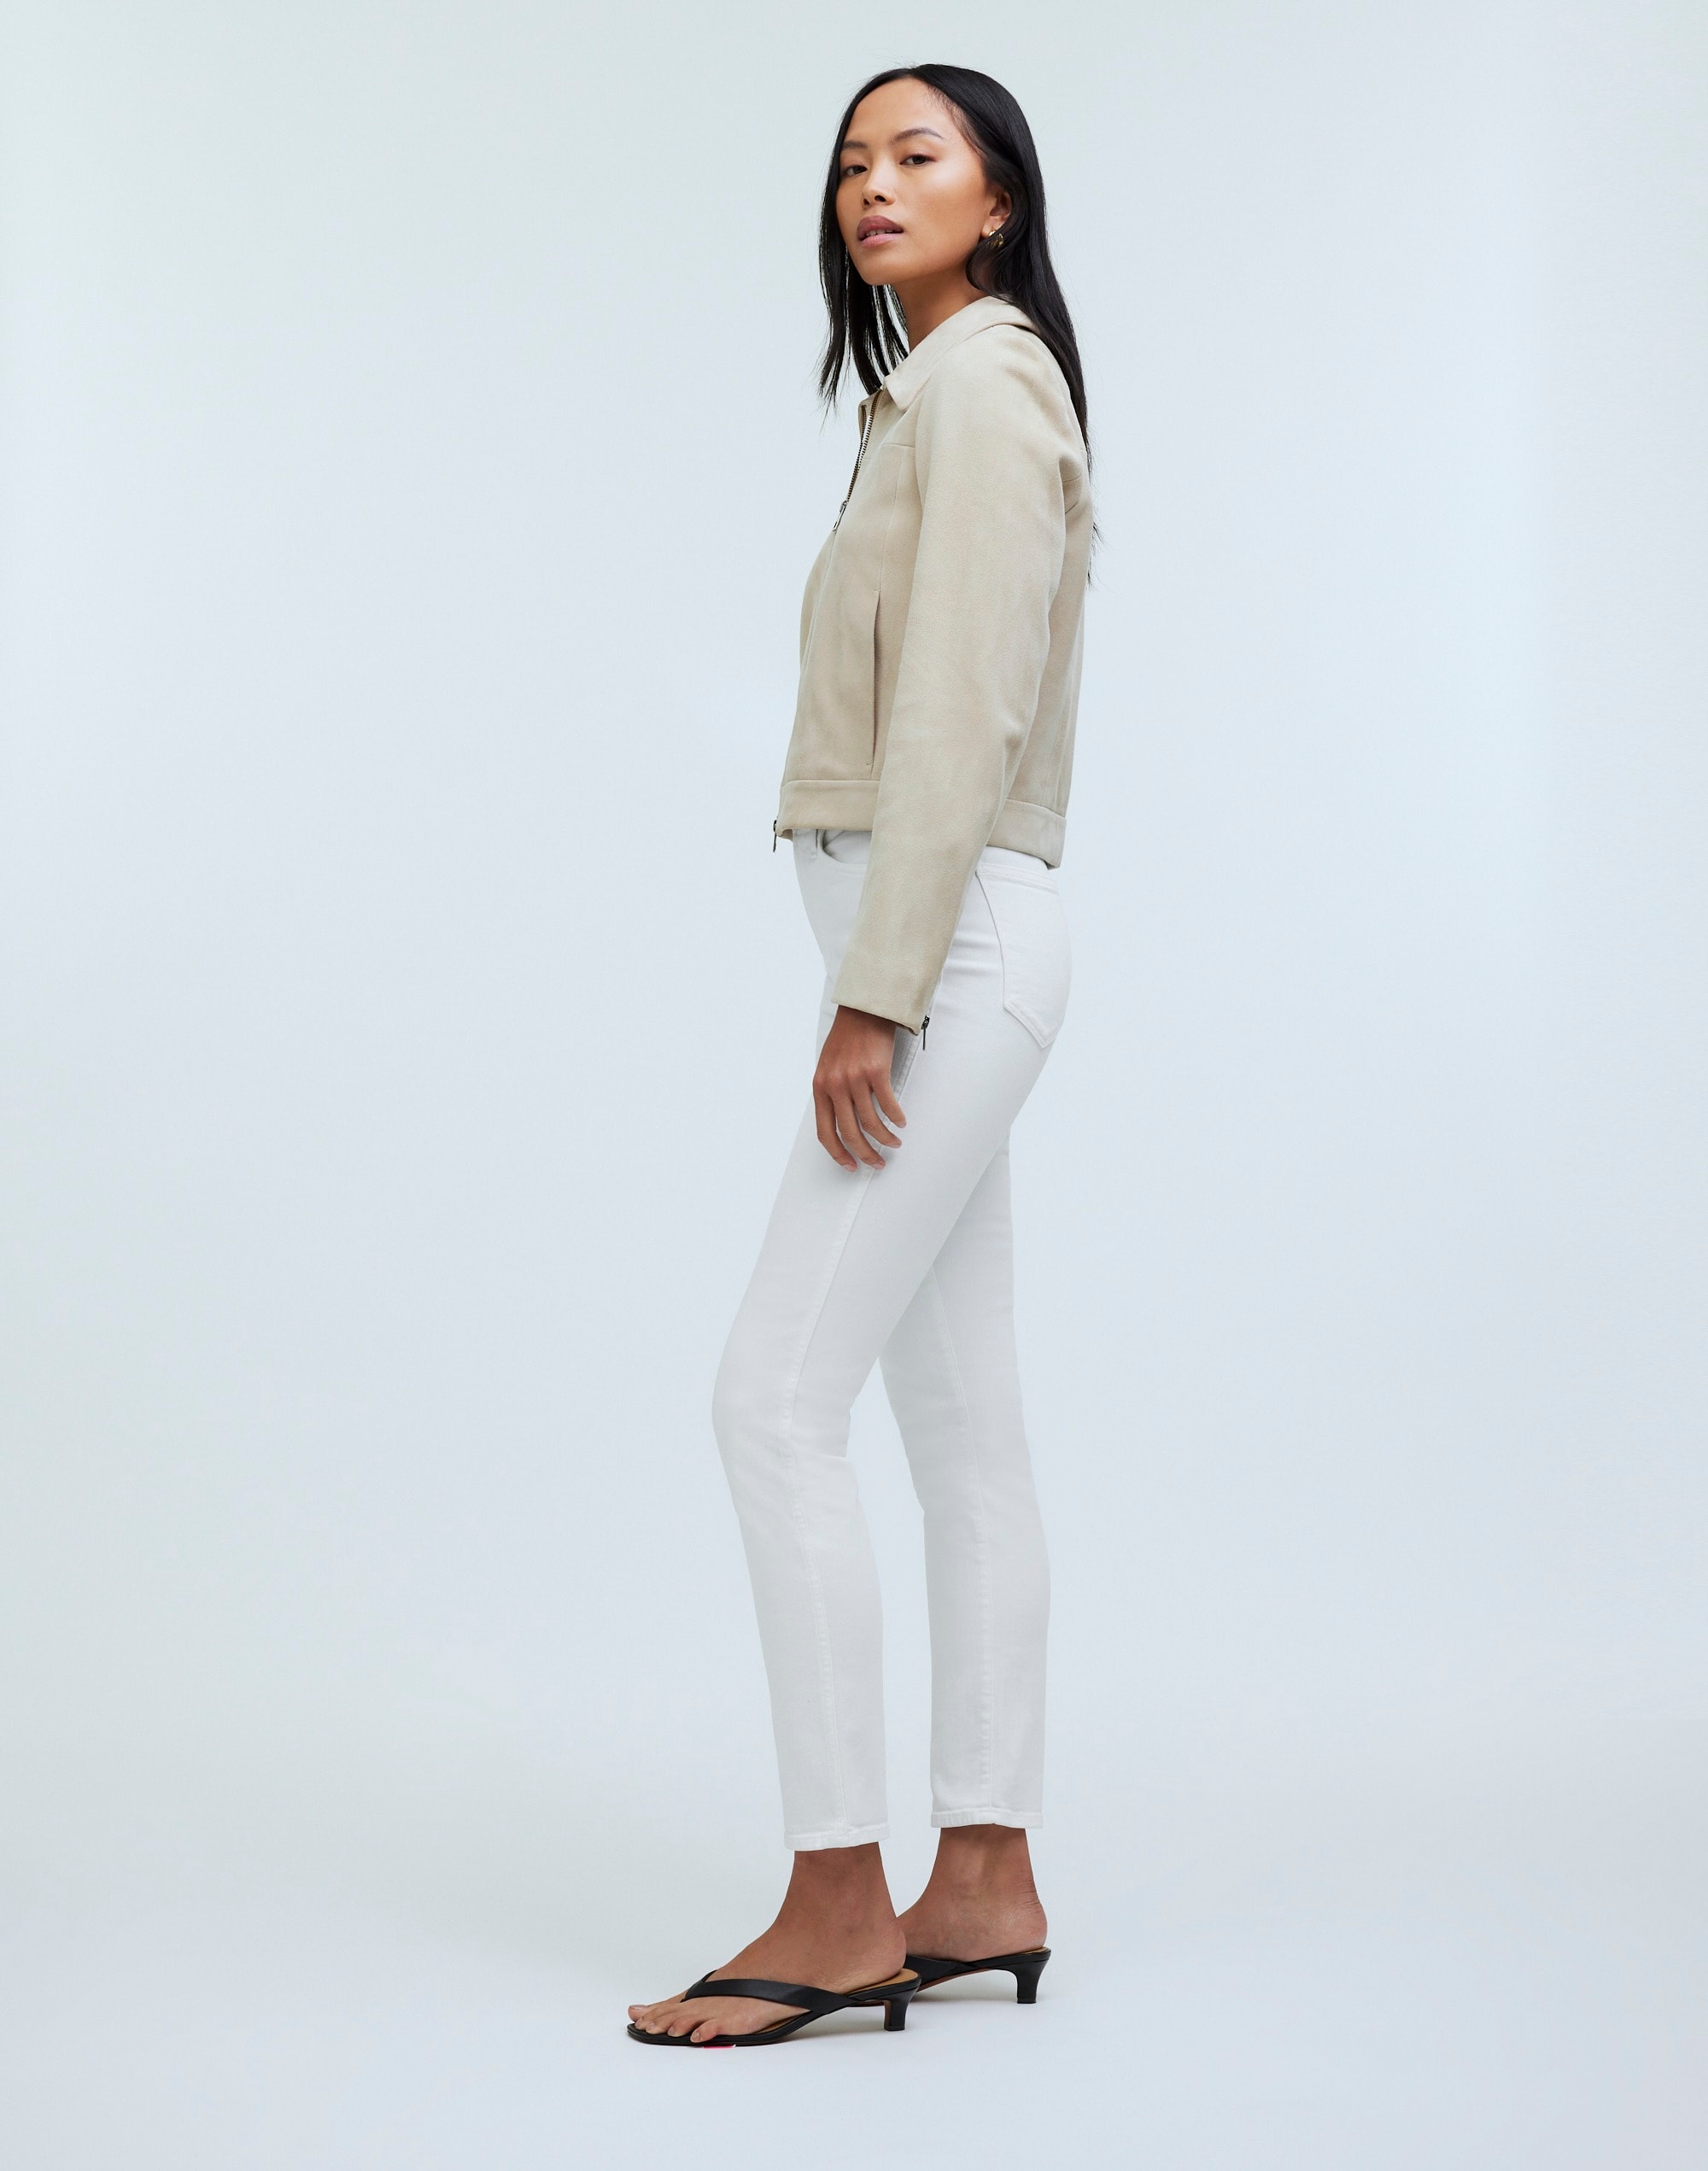 Stovepipe Jeans Pure White